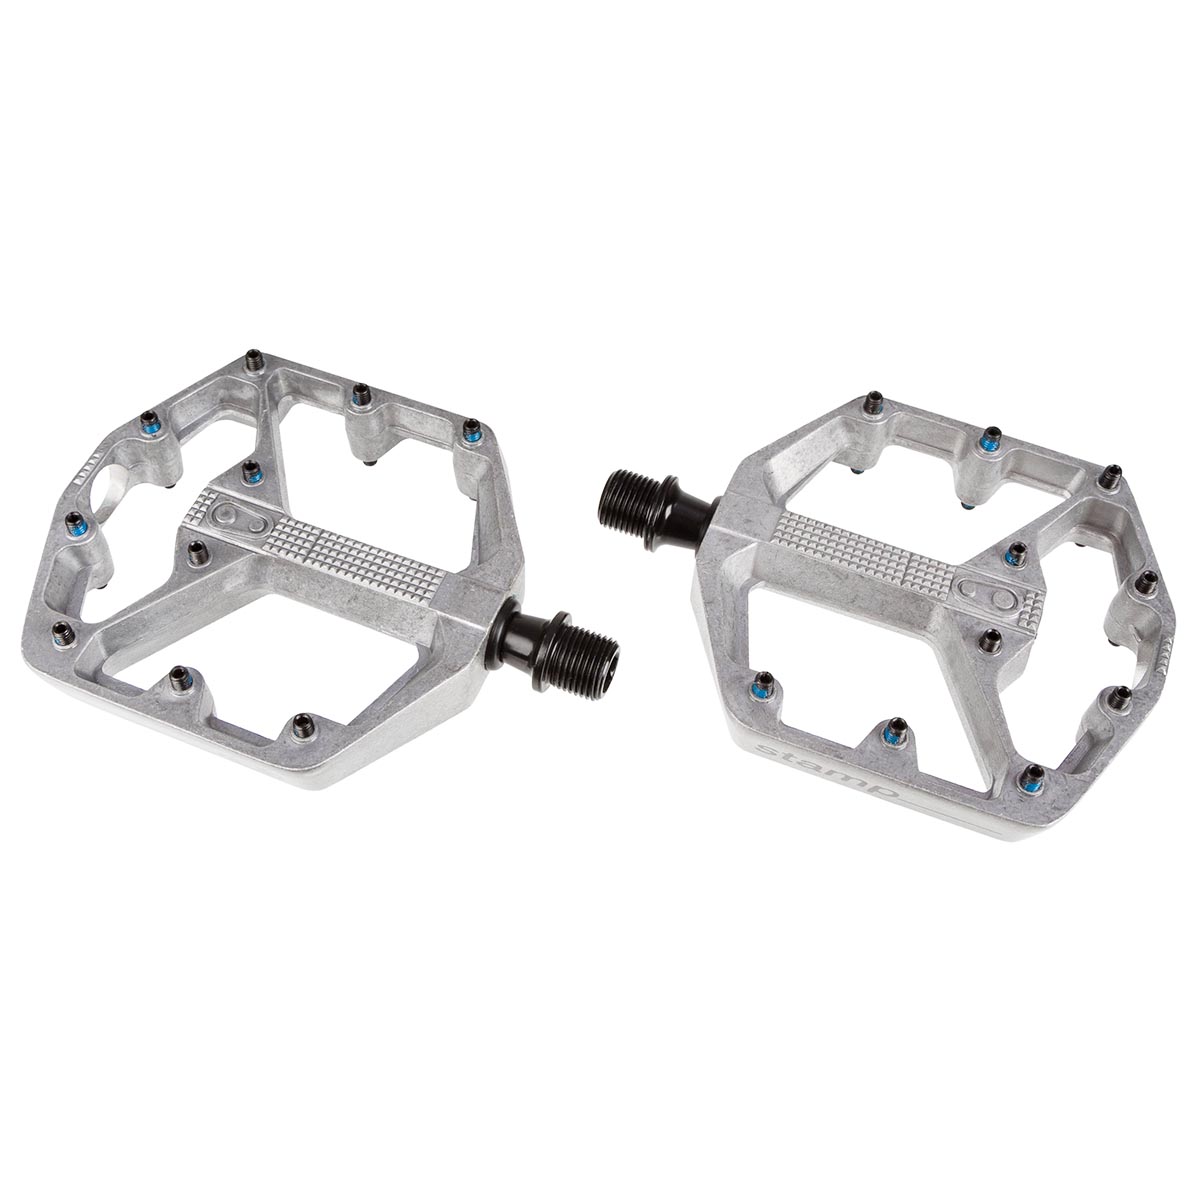 Crankbrothers Pedale Stamp 2 2019 Raw, Small